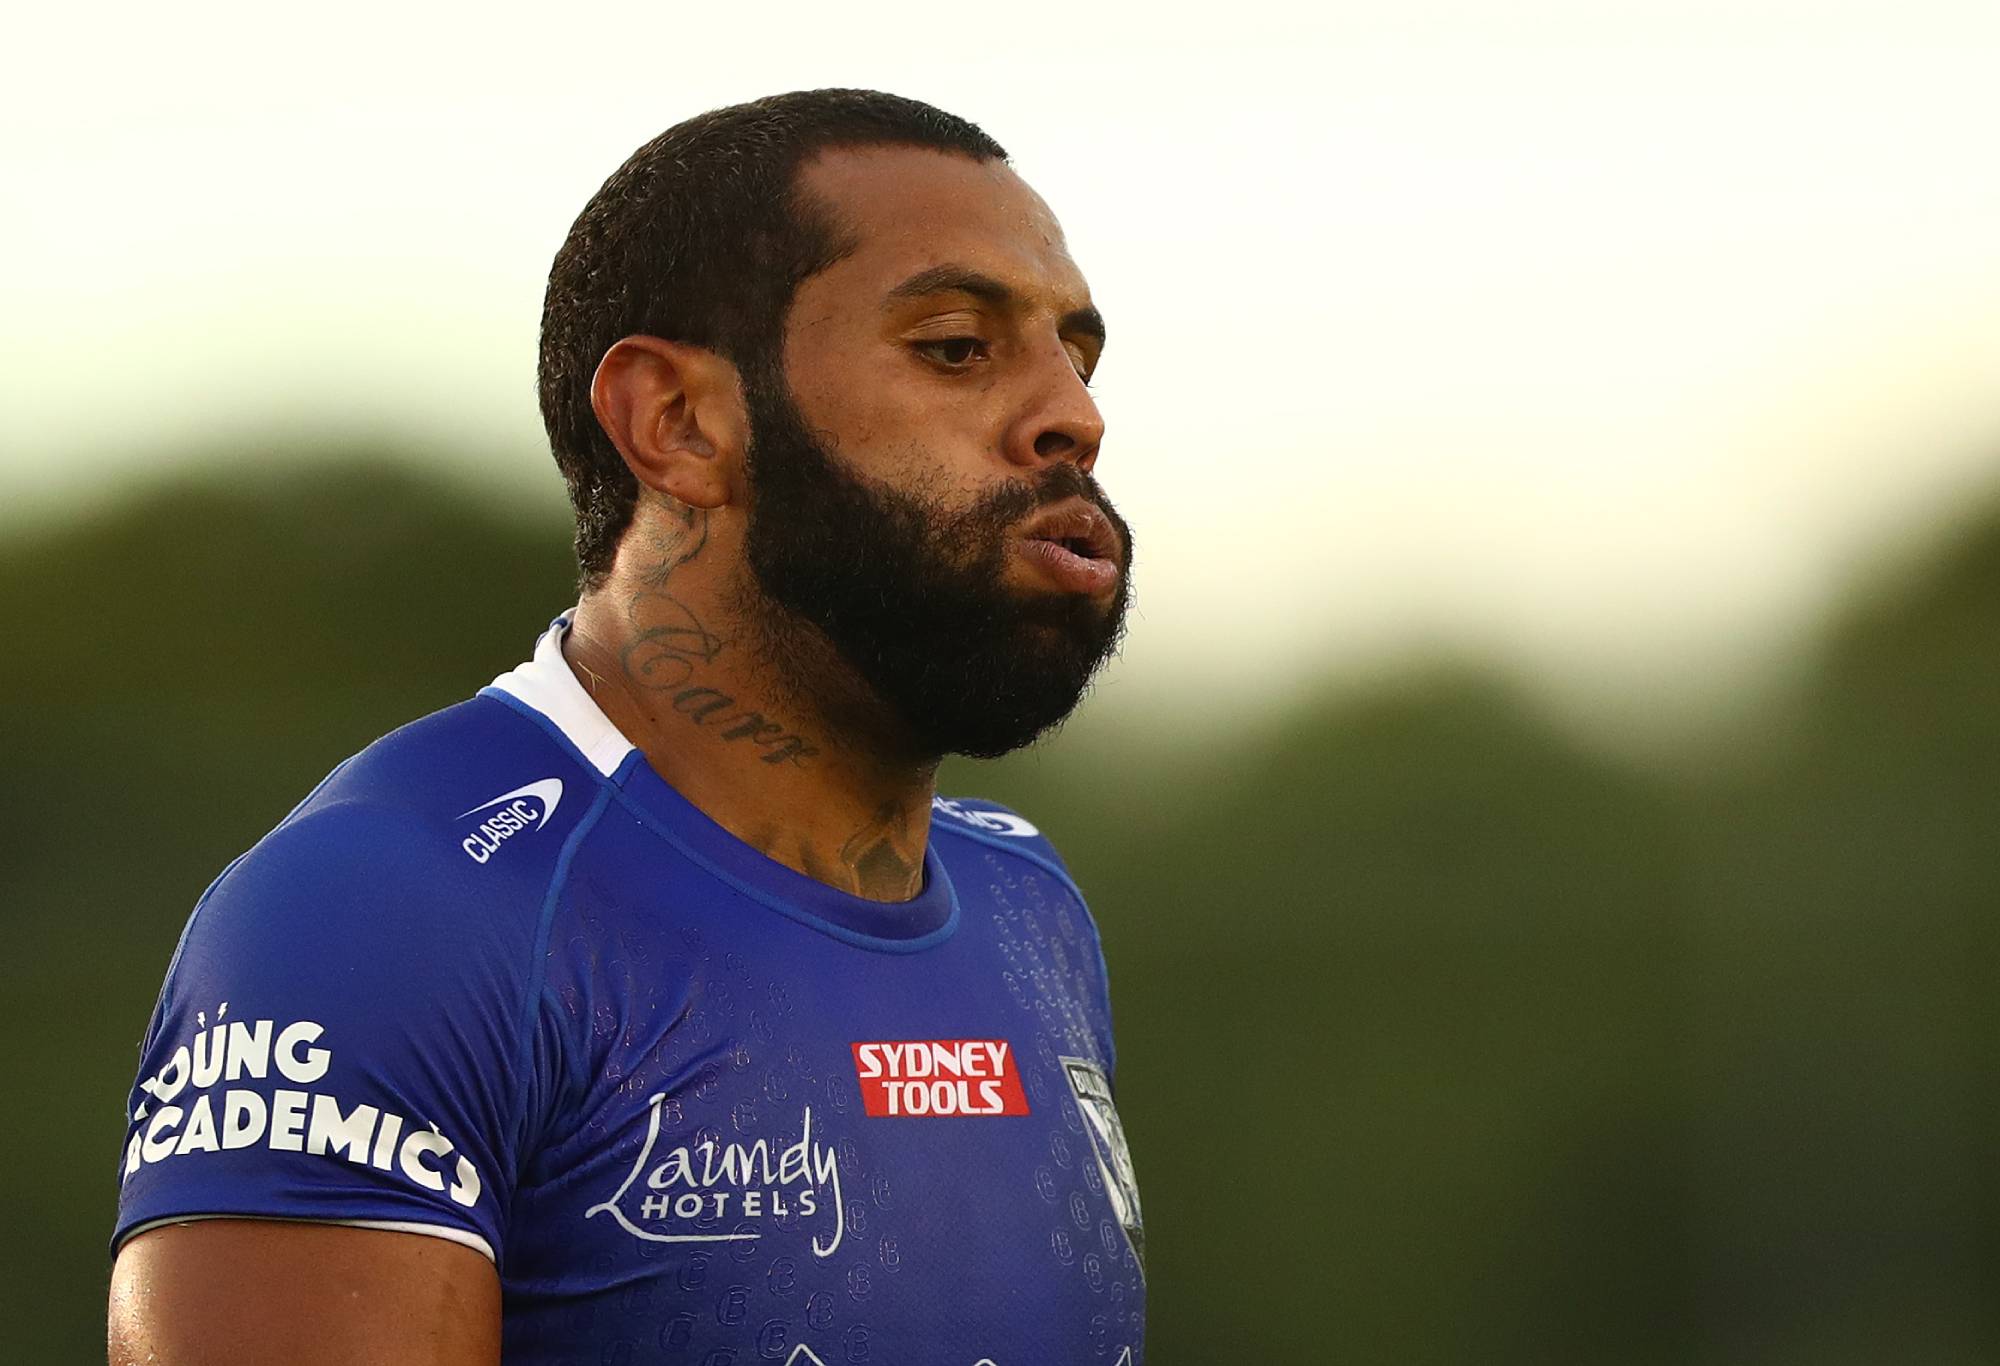 Josh Addo-Carr of the Bulldogs looks on during the NRL Trial Match between the Cronulla Sharks and the Canterbury Bulldogs at PointsBet Stadium on February 28, 2022 in Sydney, Australia. (Photo by Mark Metcalfe/Getty Images)